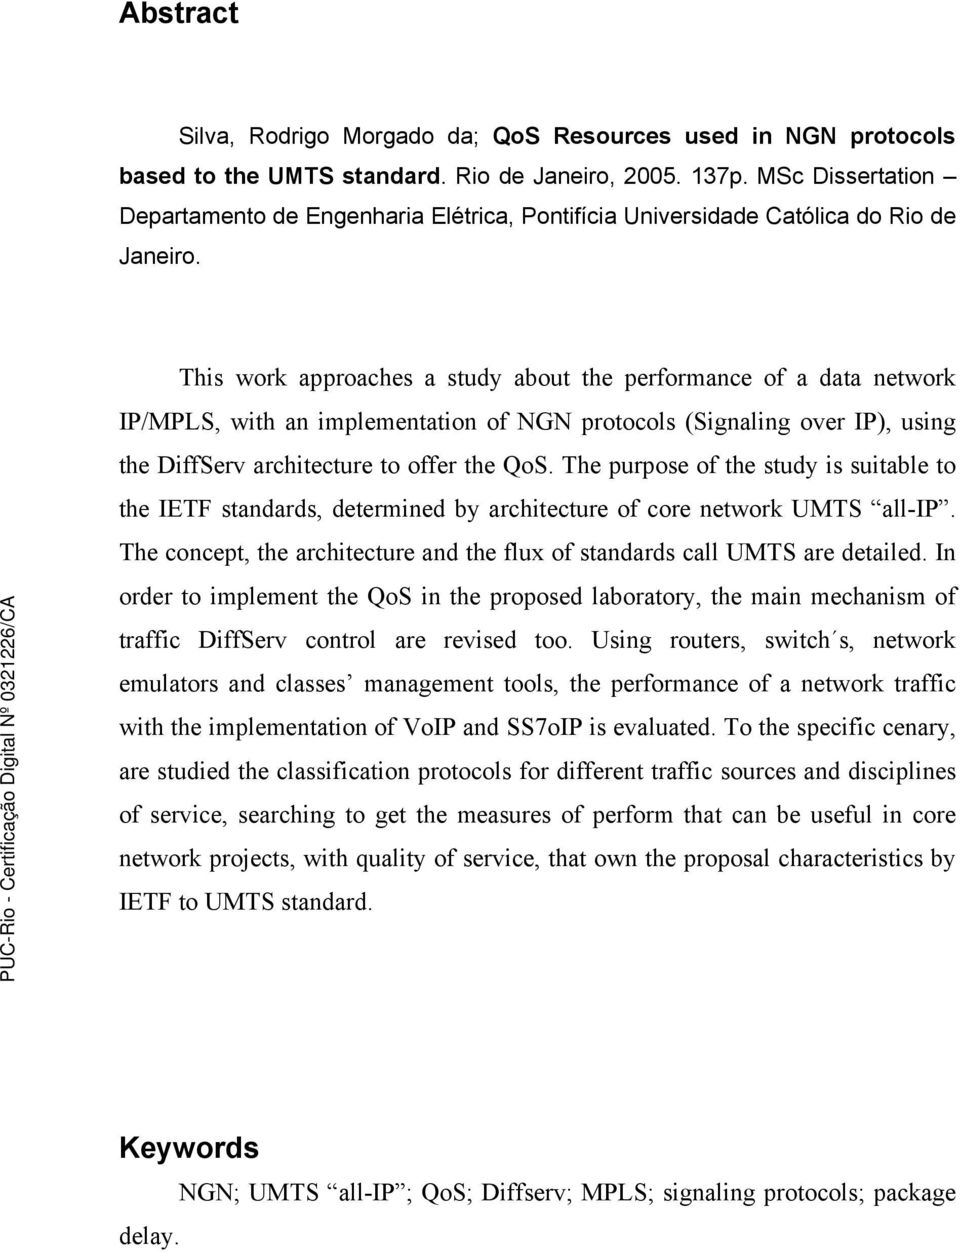 This work approaches a study about the performance of a data network IP/MPLS, with an implementation of NGN protocols (Signaling over IP), using the DiffServ architecture to offer the QoS.